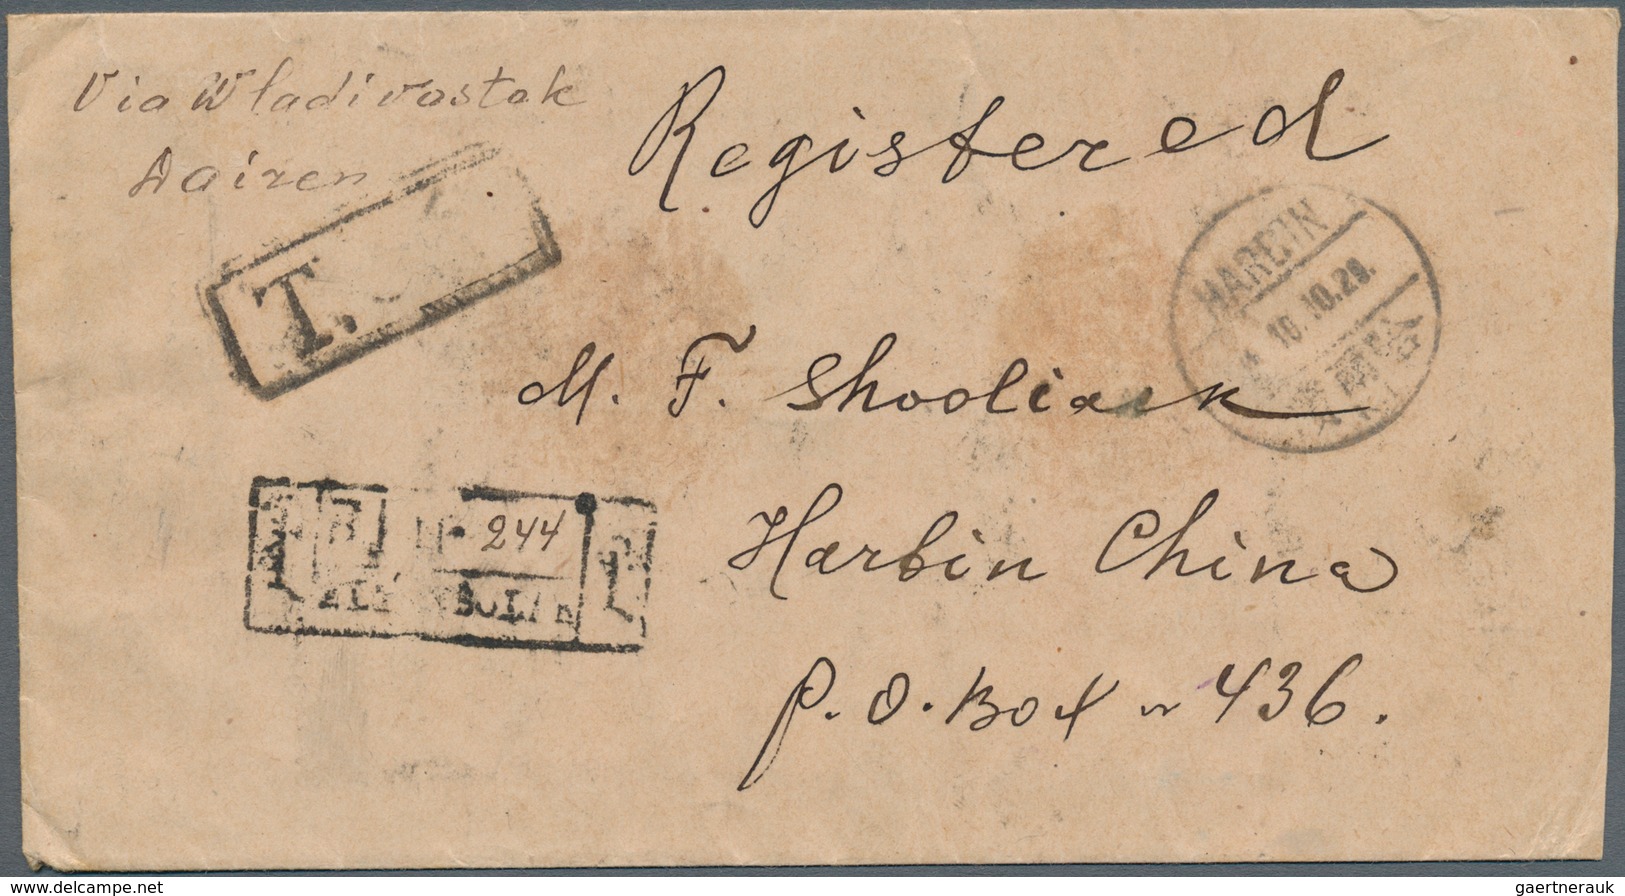 00386 Mongolei: 1929 Registered Cover With Russian/Mongolian/Chinese Mixed Franking From A Russian P.O. To - Mongolia